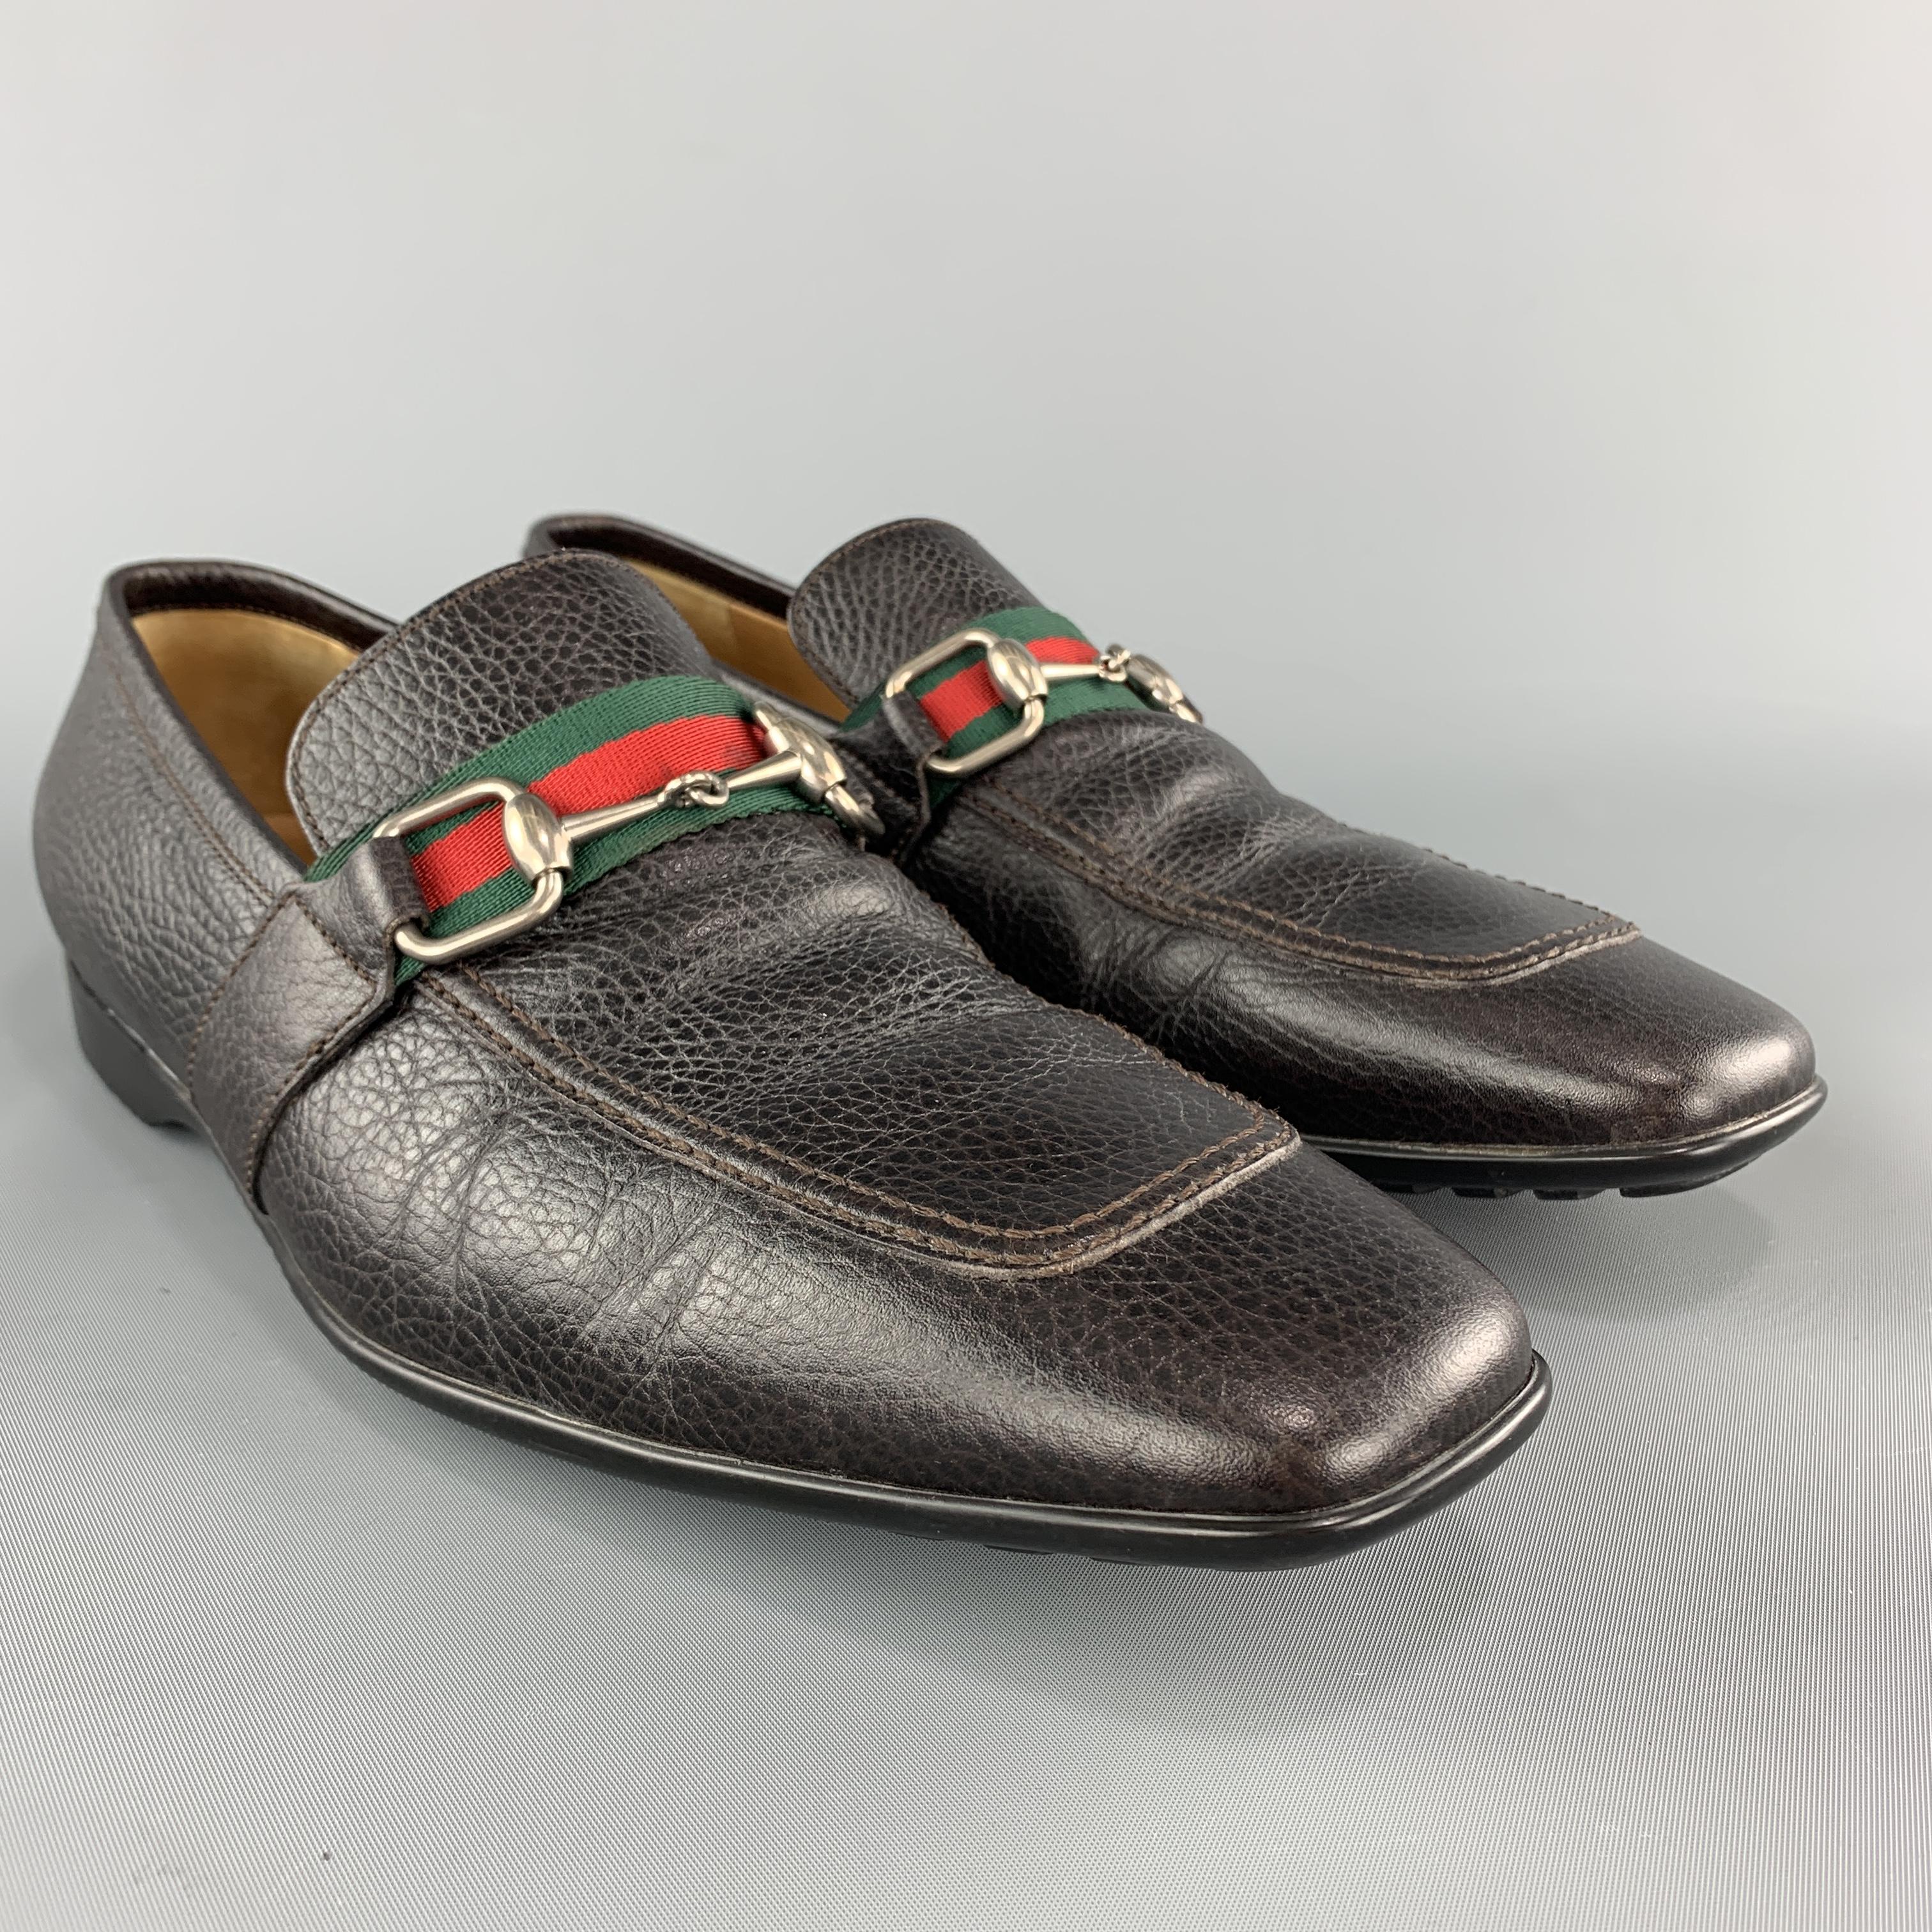 GUCCI slip on loafers come in dark brown textured leather with a rubber sole and squared apron toe detailed with a striped band and silver tone horsebit. Made in Italy.

Very Good Pre-Owned Condition.
Marked: IT 43

Outsole: 12 x 4 in.